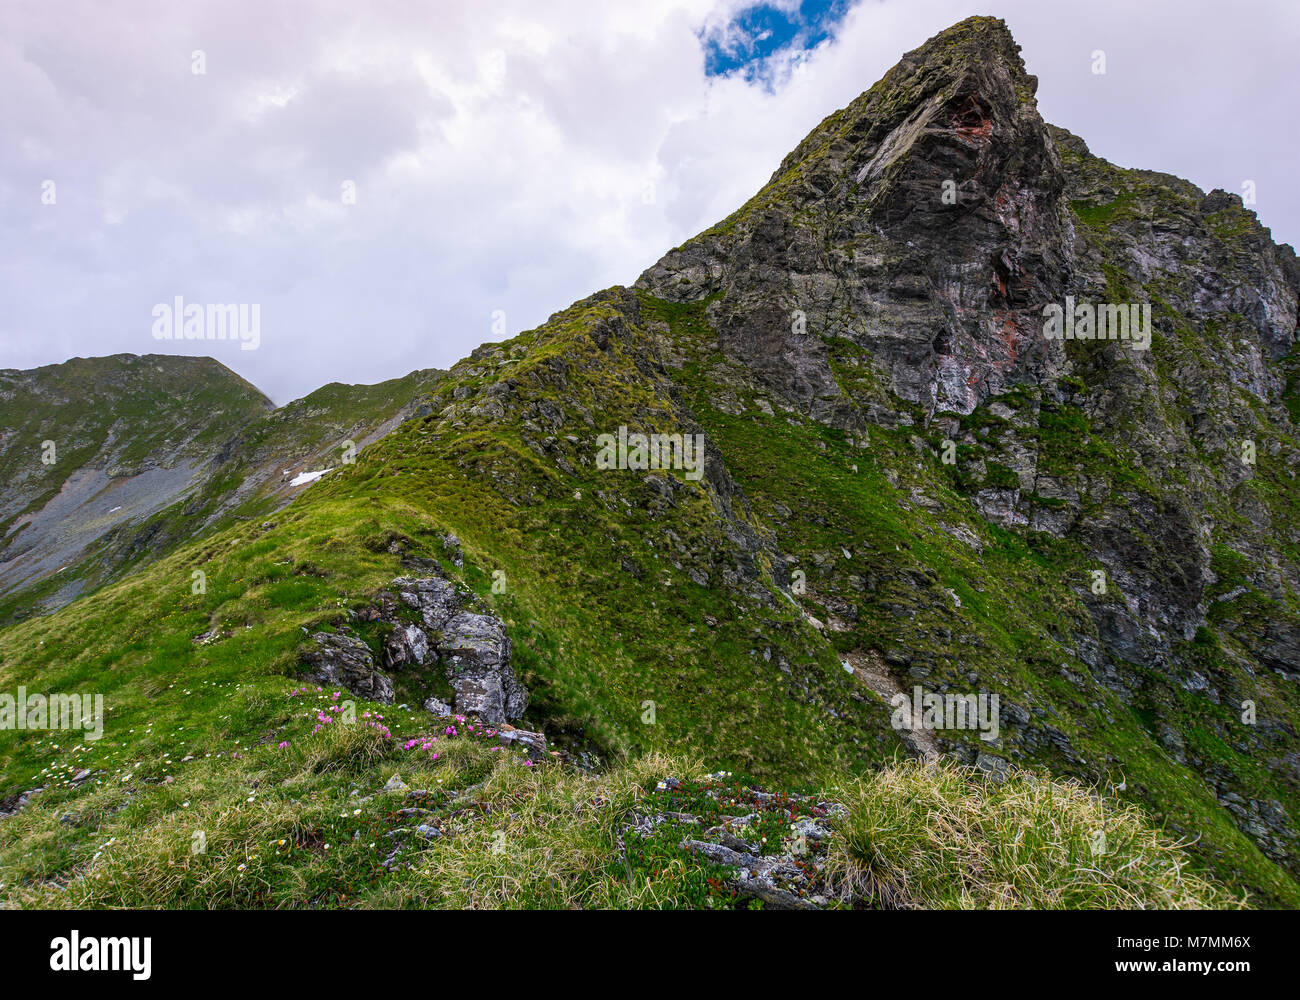 on the edge of rocky cliff peak. lovely nature scenery in mountains on an overcast day Stock Photo